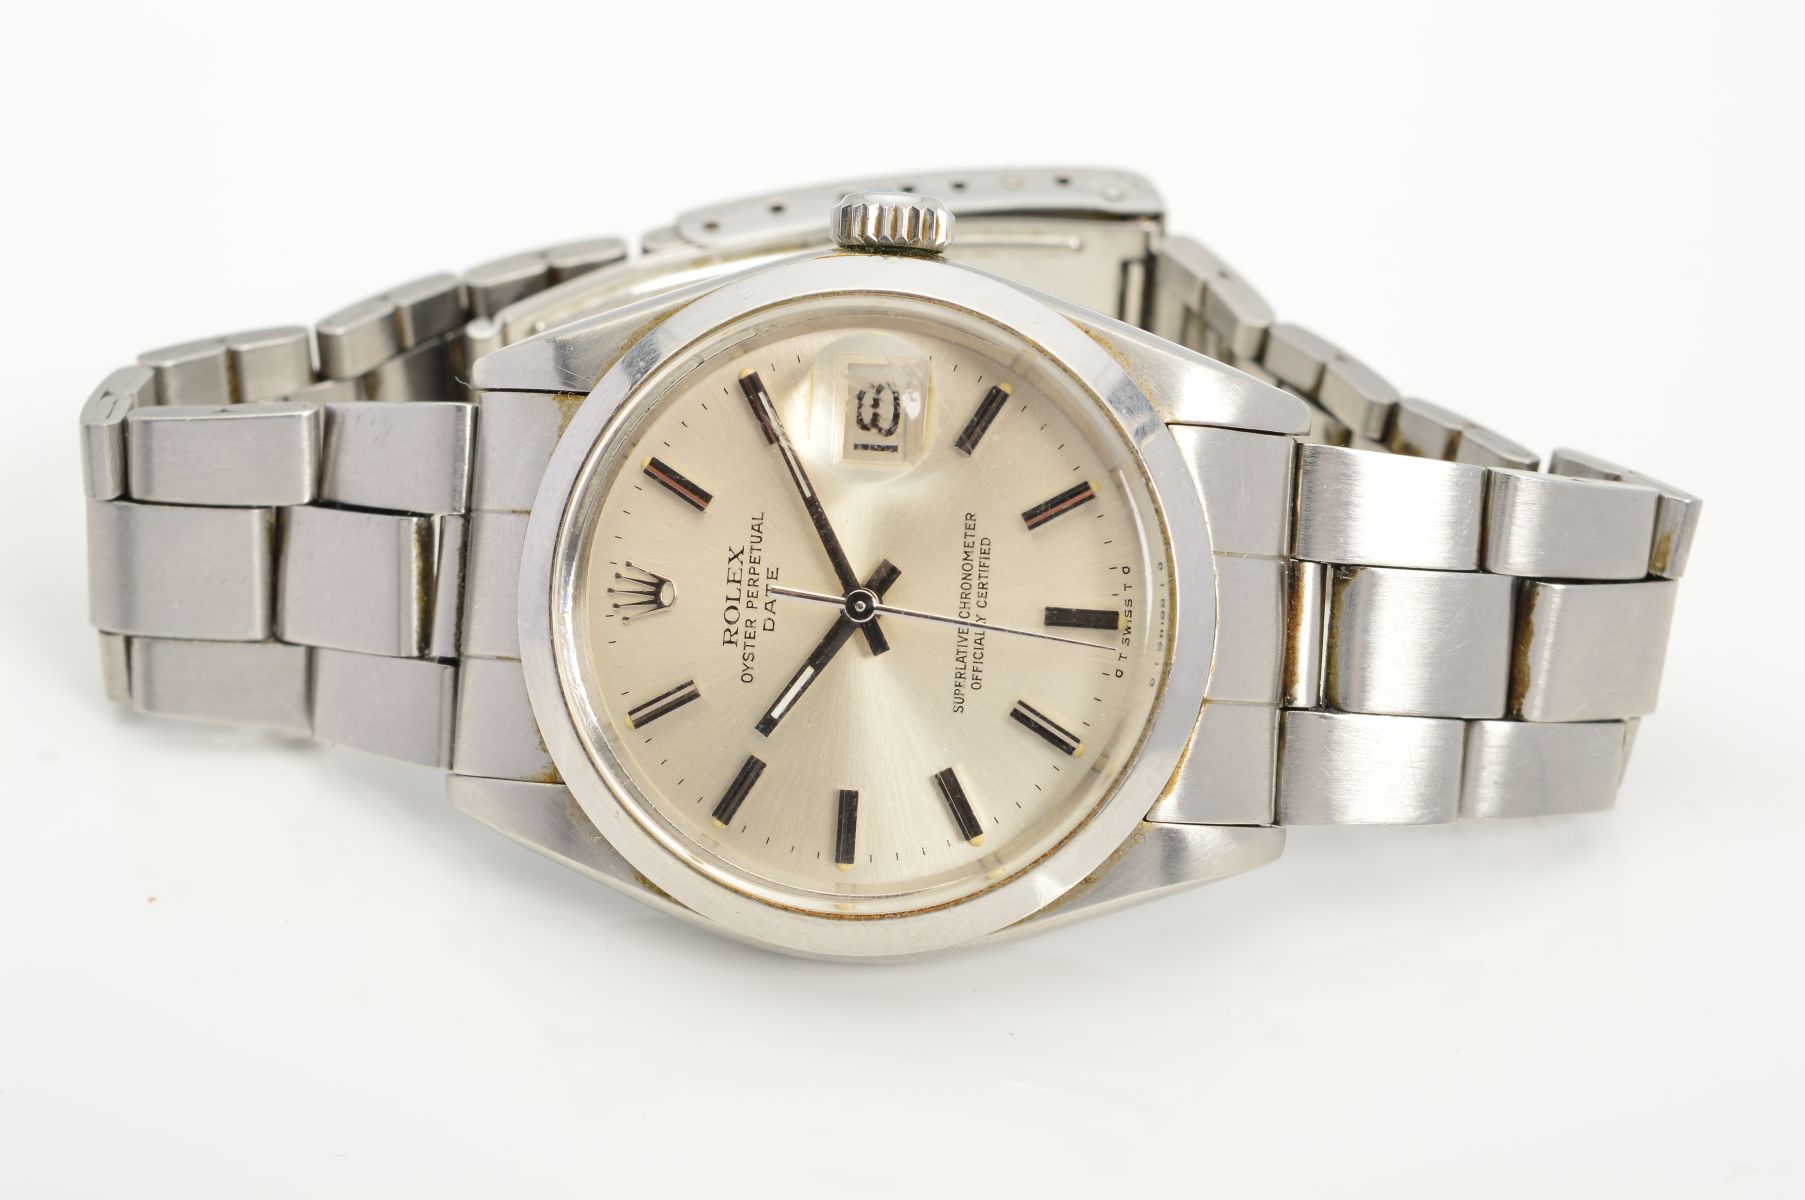 A ROLEX OYSTER PERPETUAL DATE WRISTWATCH, silvered dial with batons, cyclops lens at 3 o'clock, - Image 2 of 5